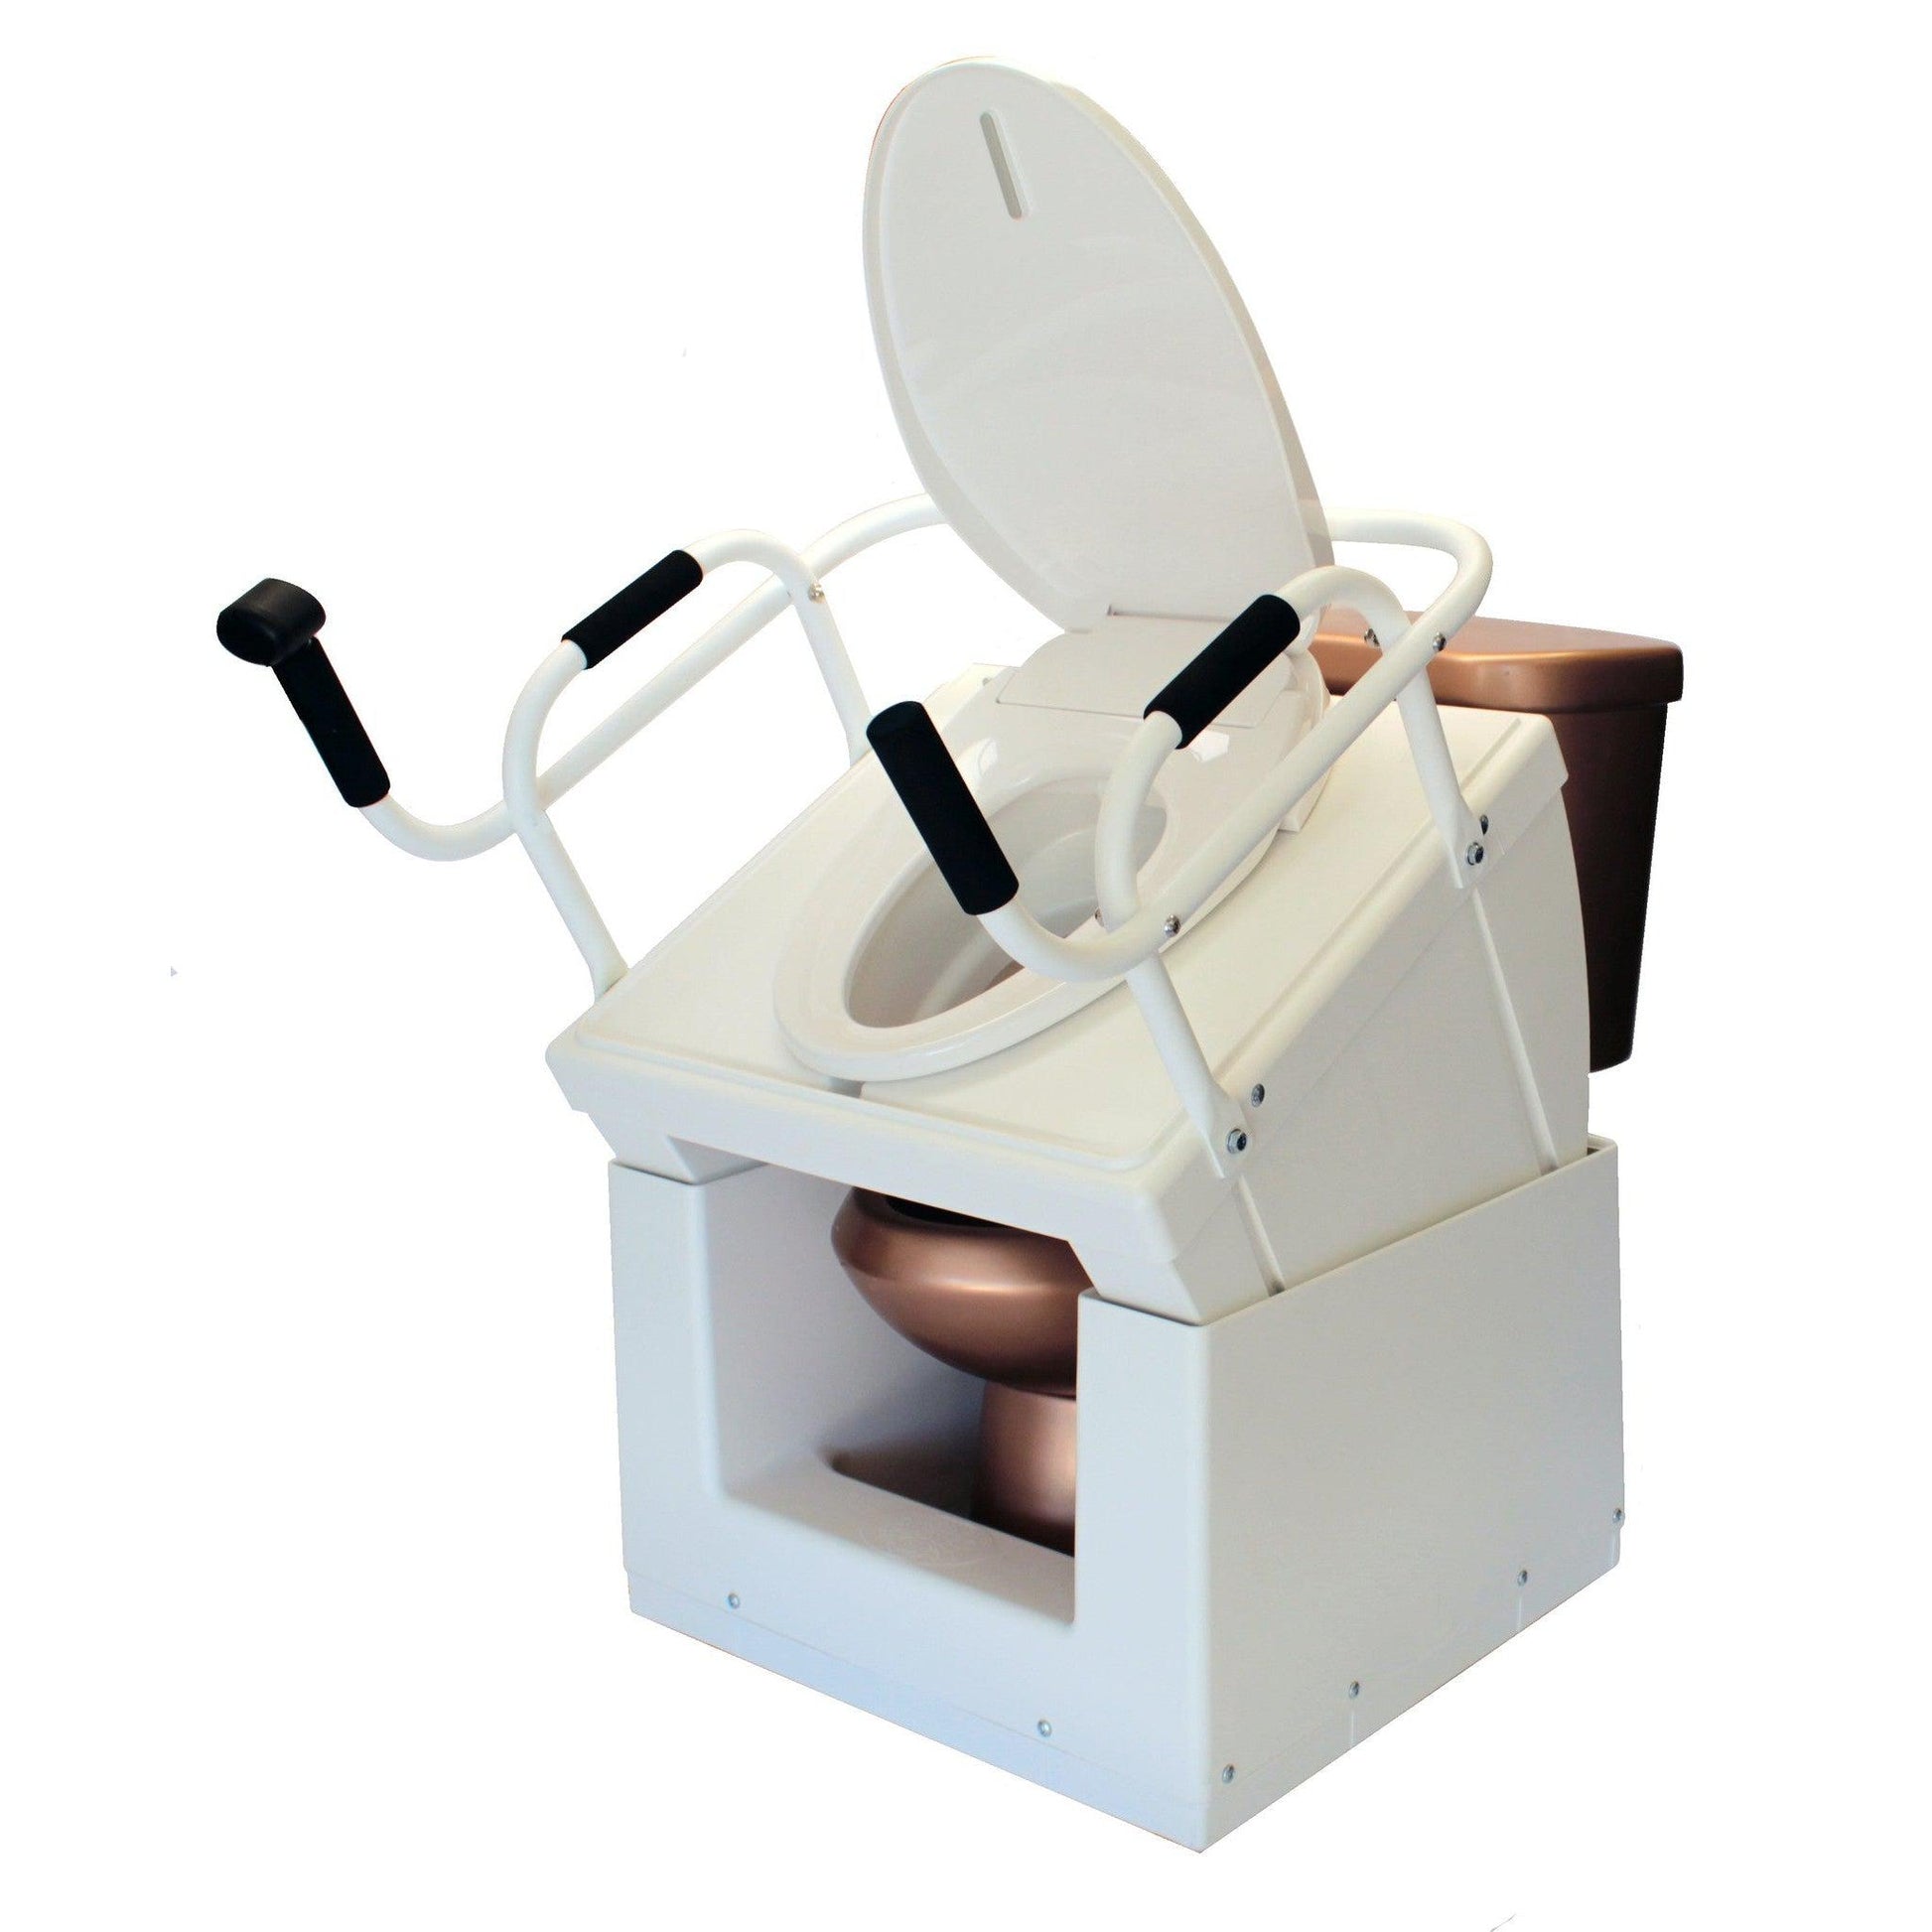 Throne Buttler 37" Powered Toilet Lift Chair With 28" Wide Handle Bar and Upgraded Soft Close Toilet Seat